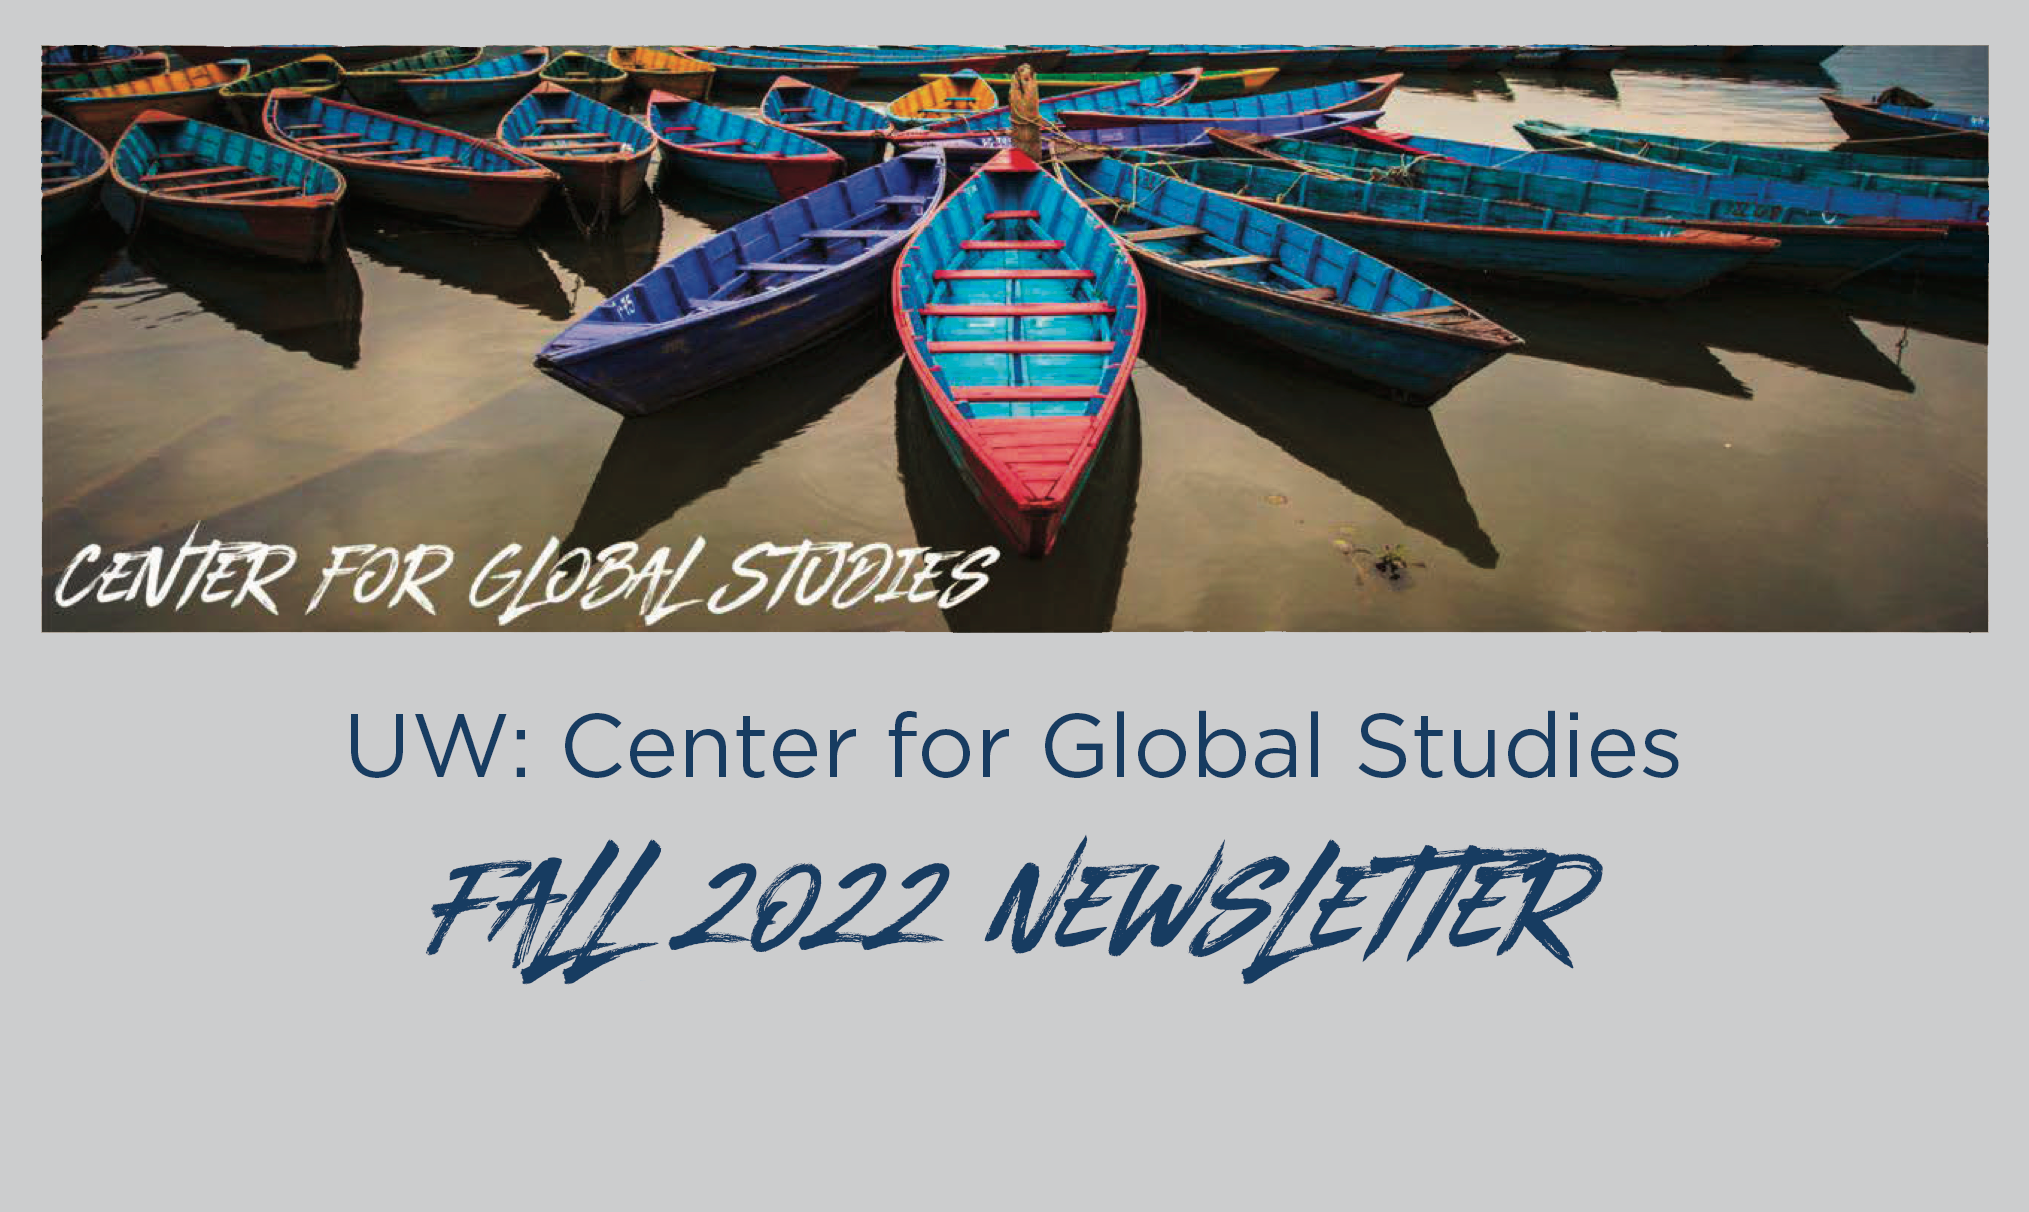 Fall 2022 Newsletter callout, with text for the University of Wyoming and the Center for Global Studies